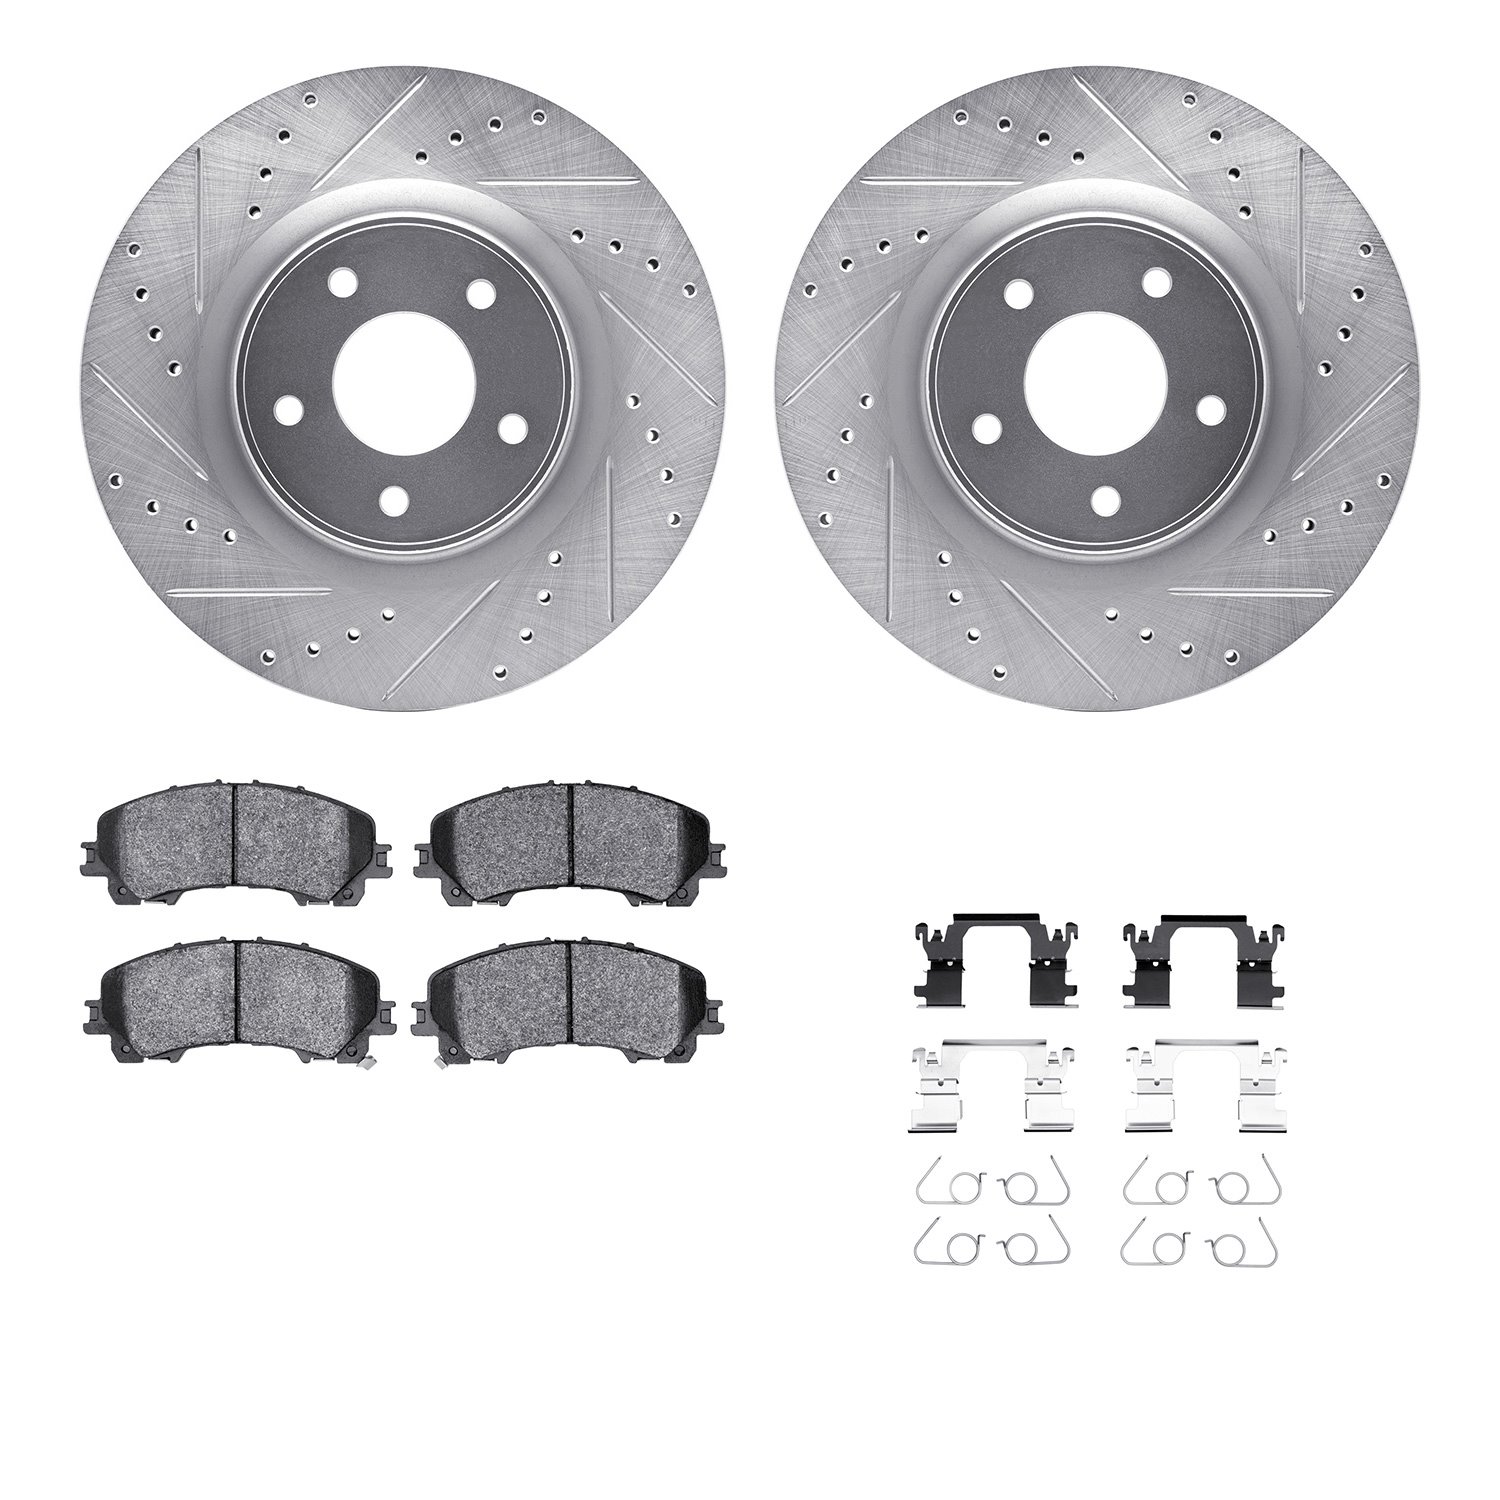 7512-67129 Drilled/Slotted Brake Rotors w/5000 Advanced Brake Pads Kit & Hardware [Silver], Fits Select Infiniti/Nissan, Positio